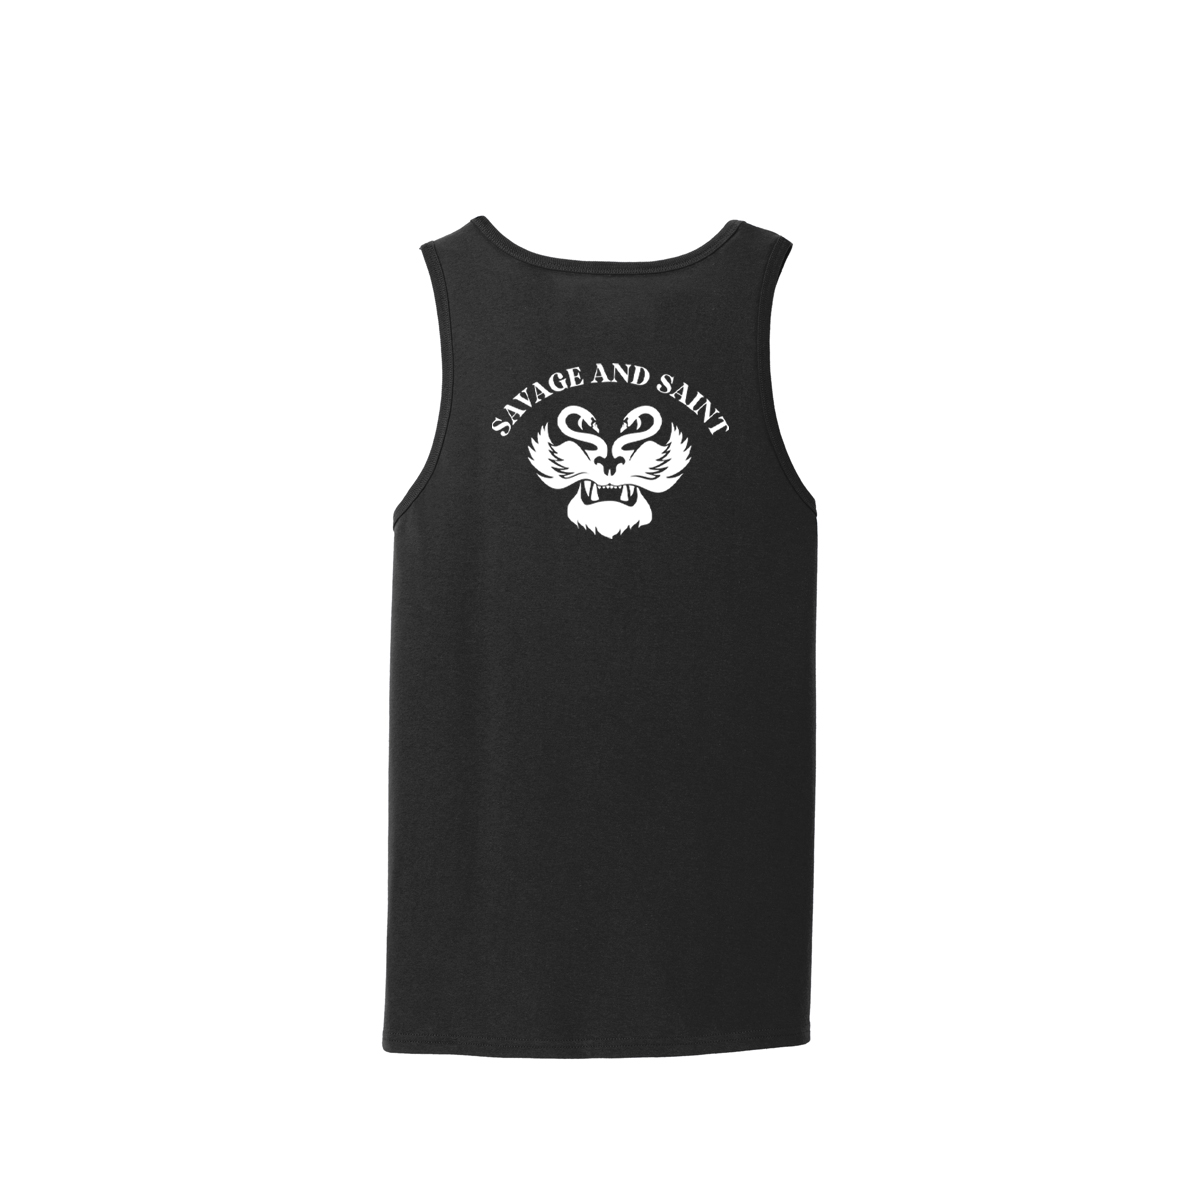 tanktop back view with left chest logo - SAVAGE AND SAINT- sleeve print included